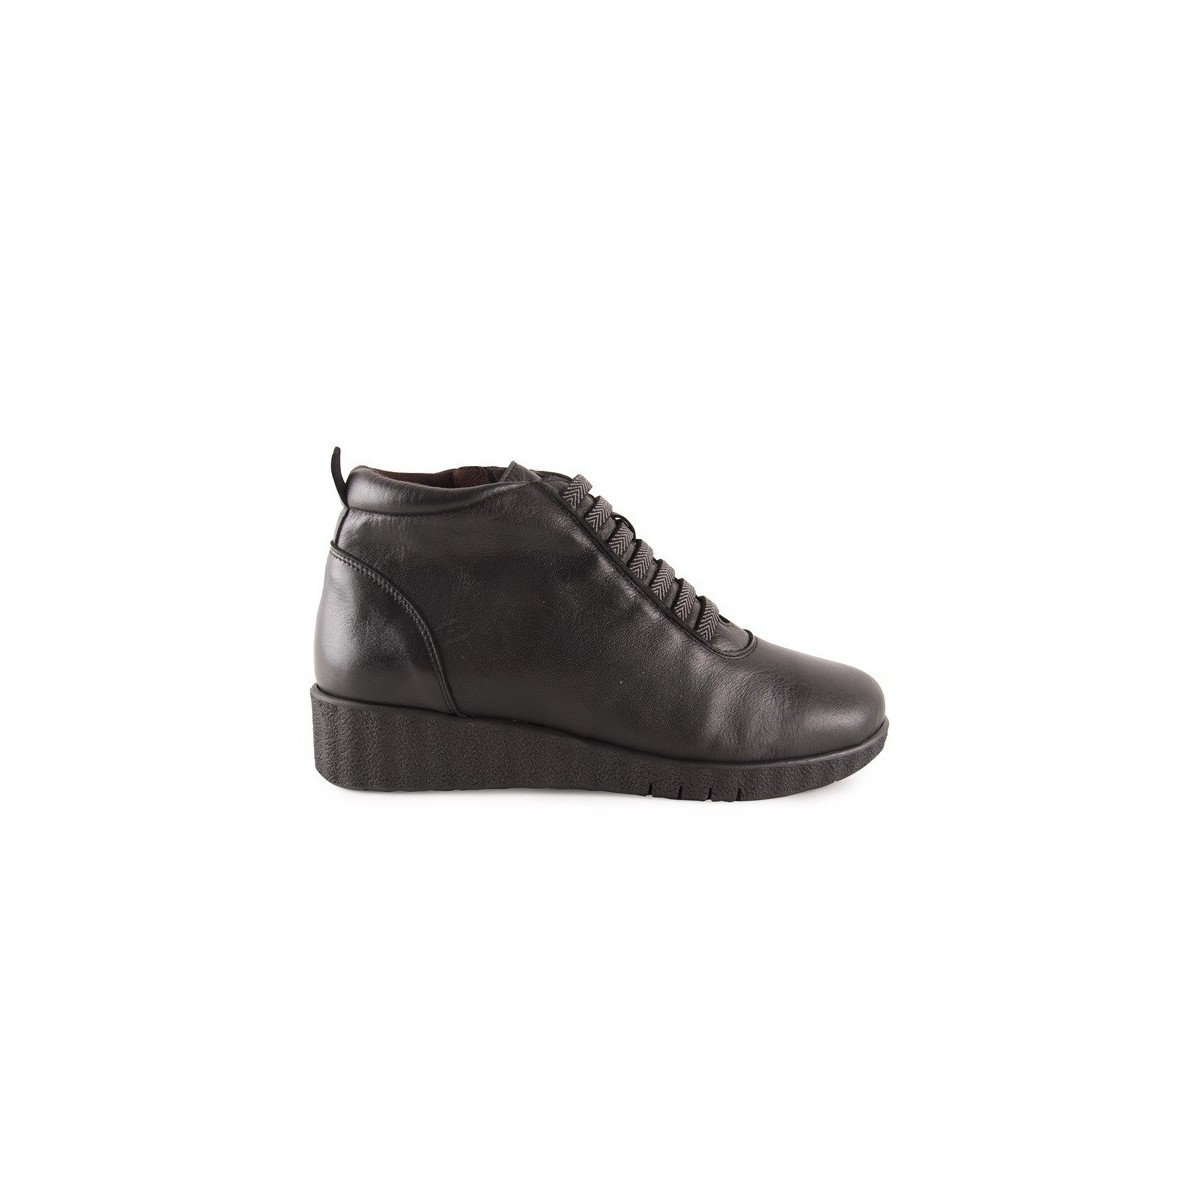 Black leather wedge ankle boots by Chamby